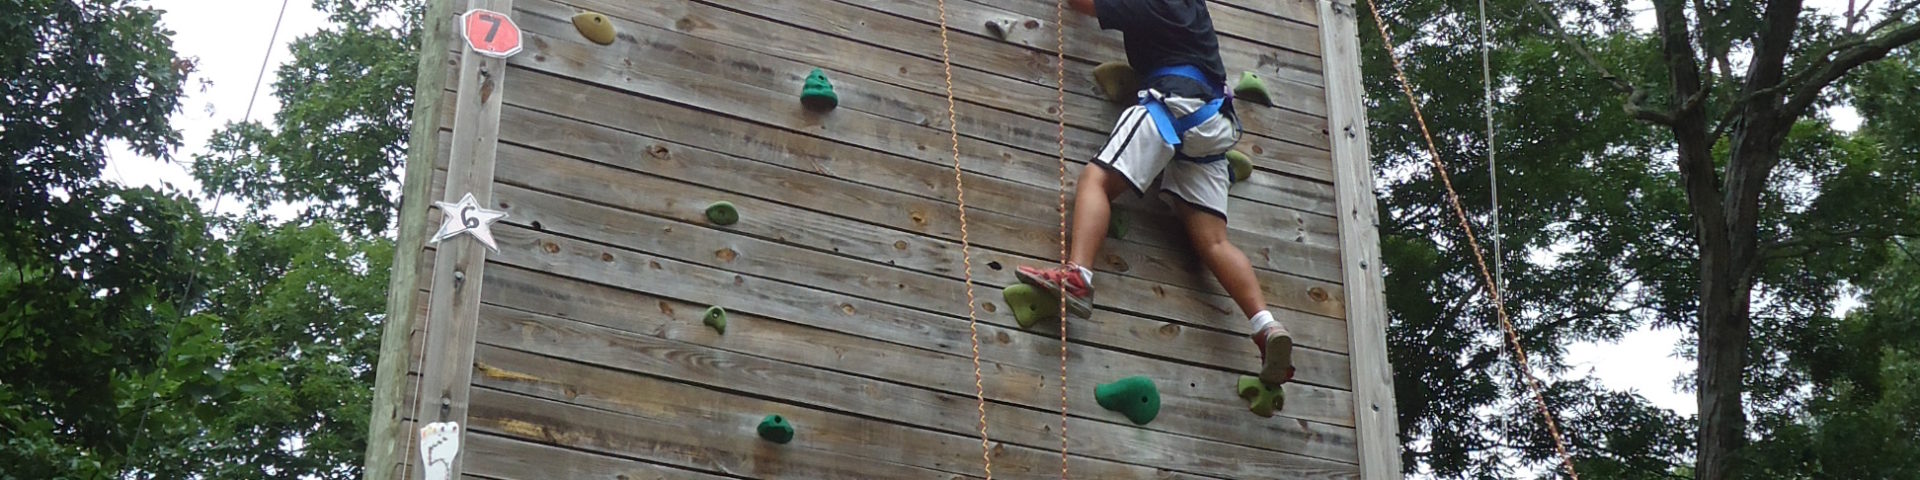 Climbing on the climbing tower (session 2)